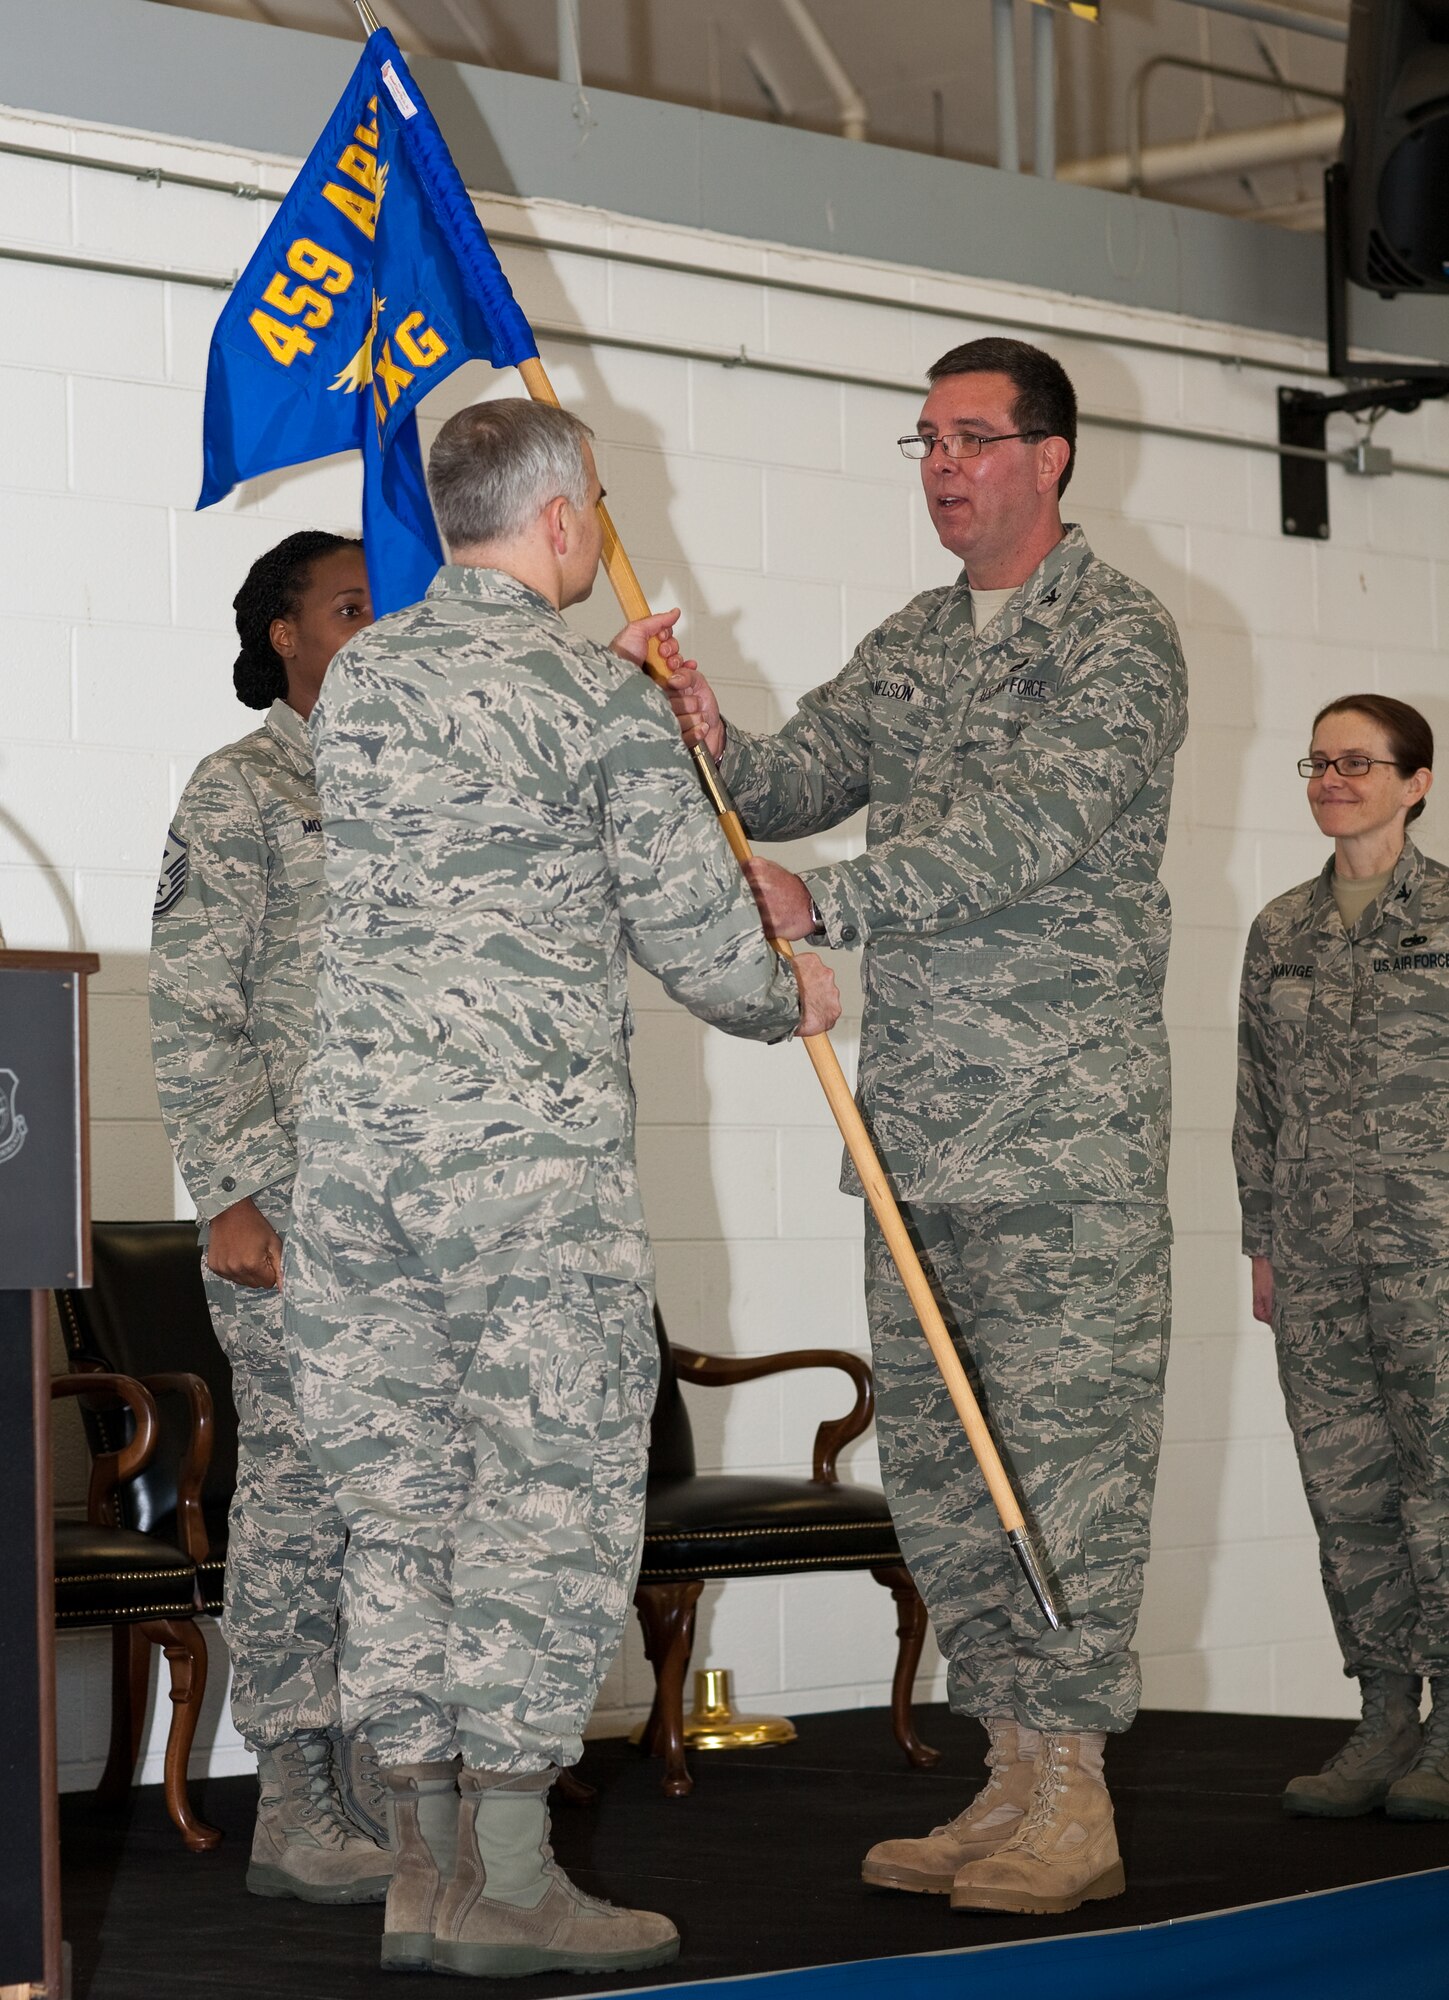 JOINT BASE ANDREWS, Md. -- Col. Timothy E. Nelson (right), passes the 459th Maintenance Group guidon to Col. James M. Allman, 459th Air Refueling Wing commander, during a change of command ceremony here Feb. 6. Col. Maureen G. Banavige (far right) now assumes command of the 459  MXG after serving previously as an Individual Mobilization Augmentee to the Chief, Logistics Operations Division, Directorate of Logistics, Air Mobility Command, Scott Air Force Base, Ill. (U.S. Air Force photo/Staff Sgt. John Meyer)